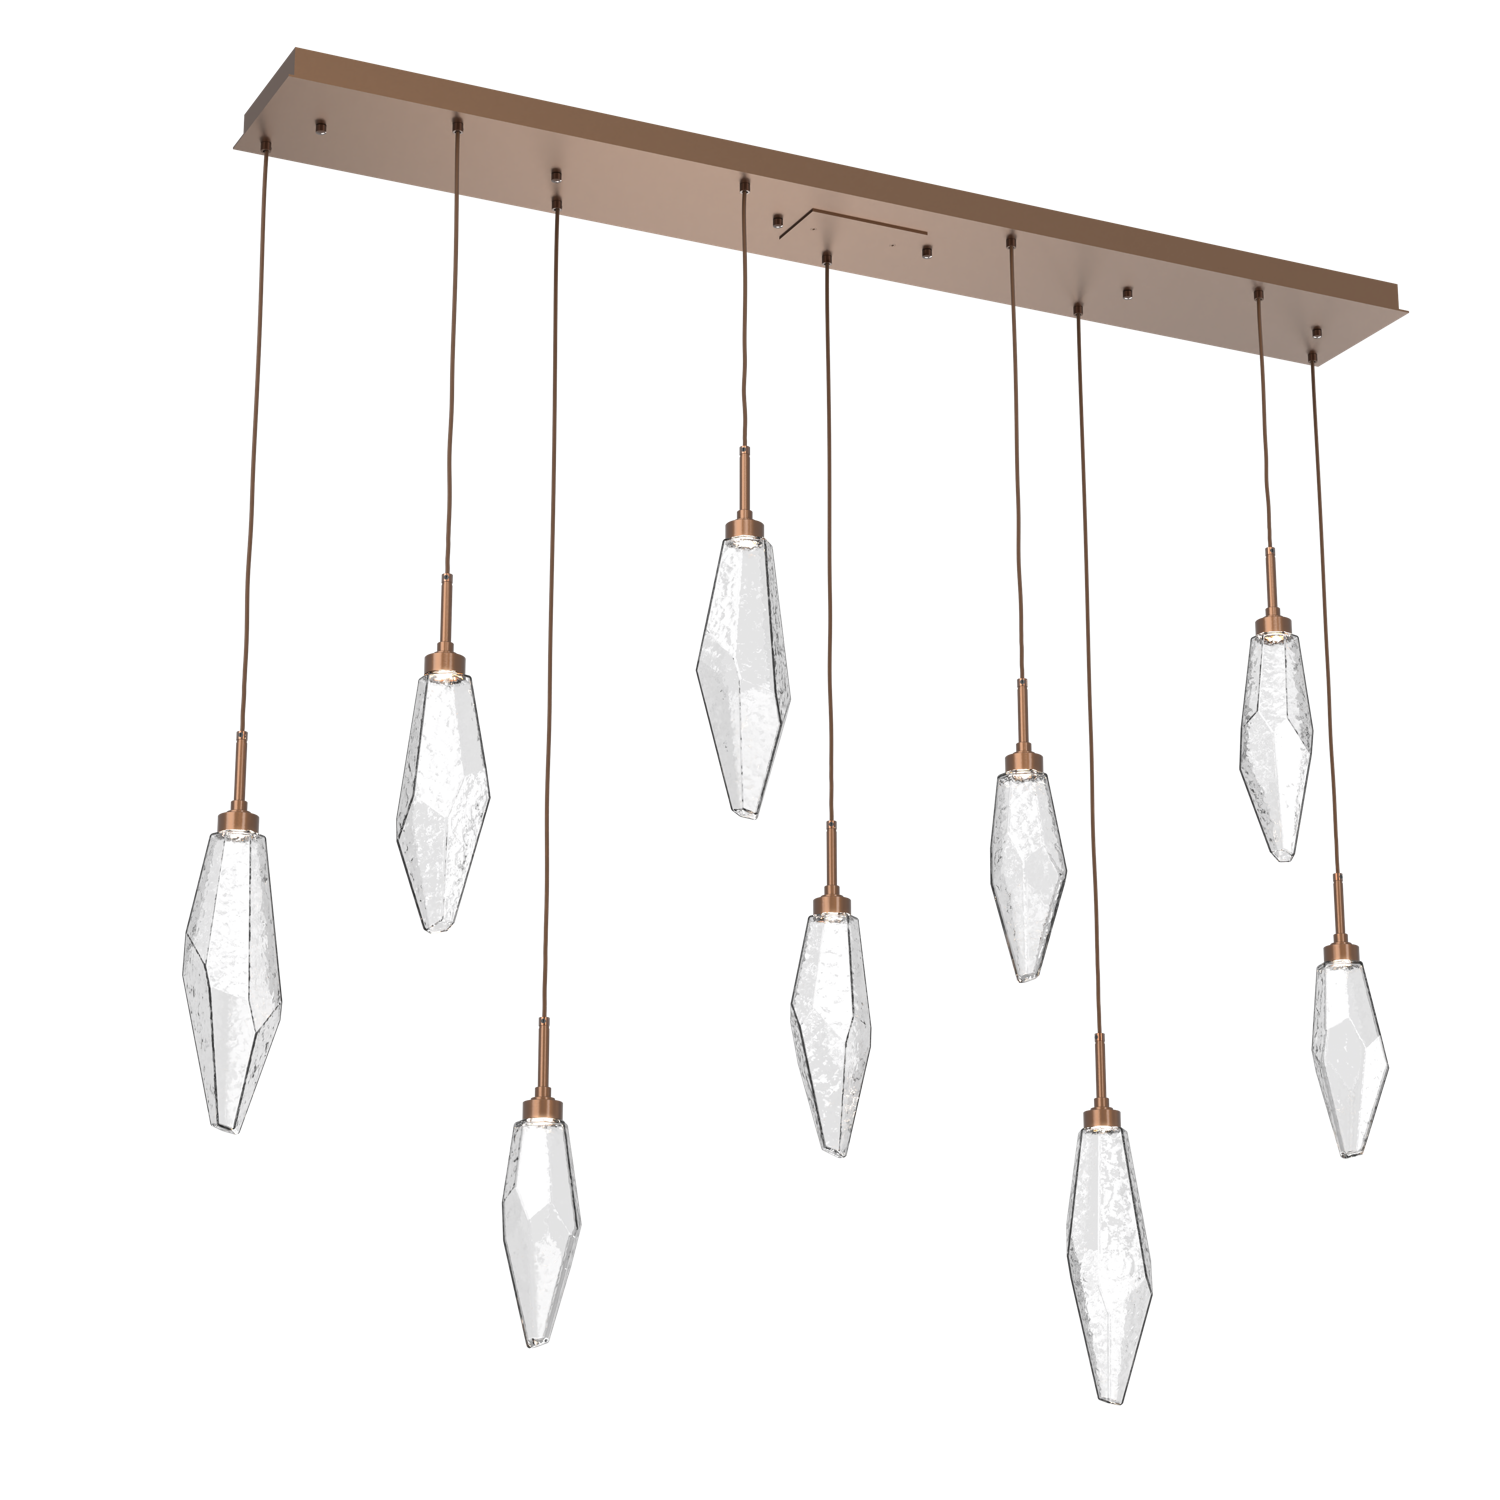 PLB0050-09-BB-CC-Hammerton-Studio-Rock-Crystal-9-light-linear-pendant-chandelier-with-burnished-bronze-finish-and-clear-glass-shades-and-LED-lamping